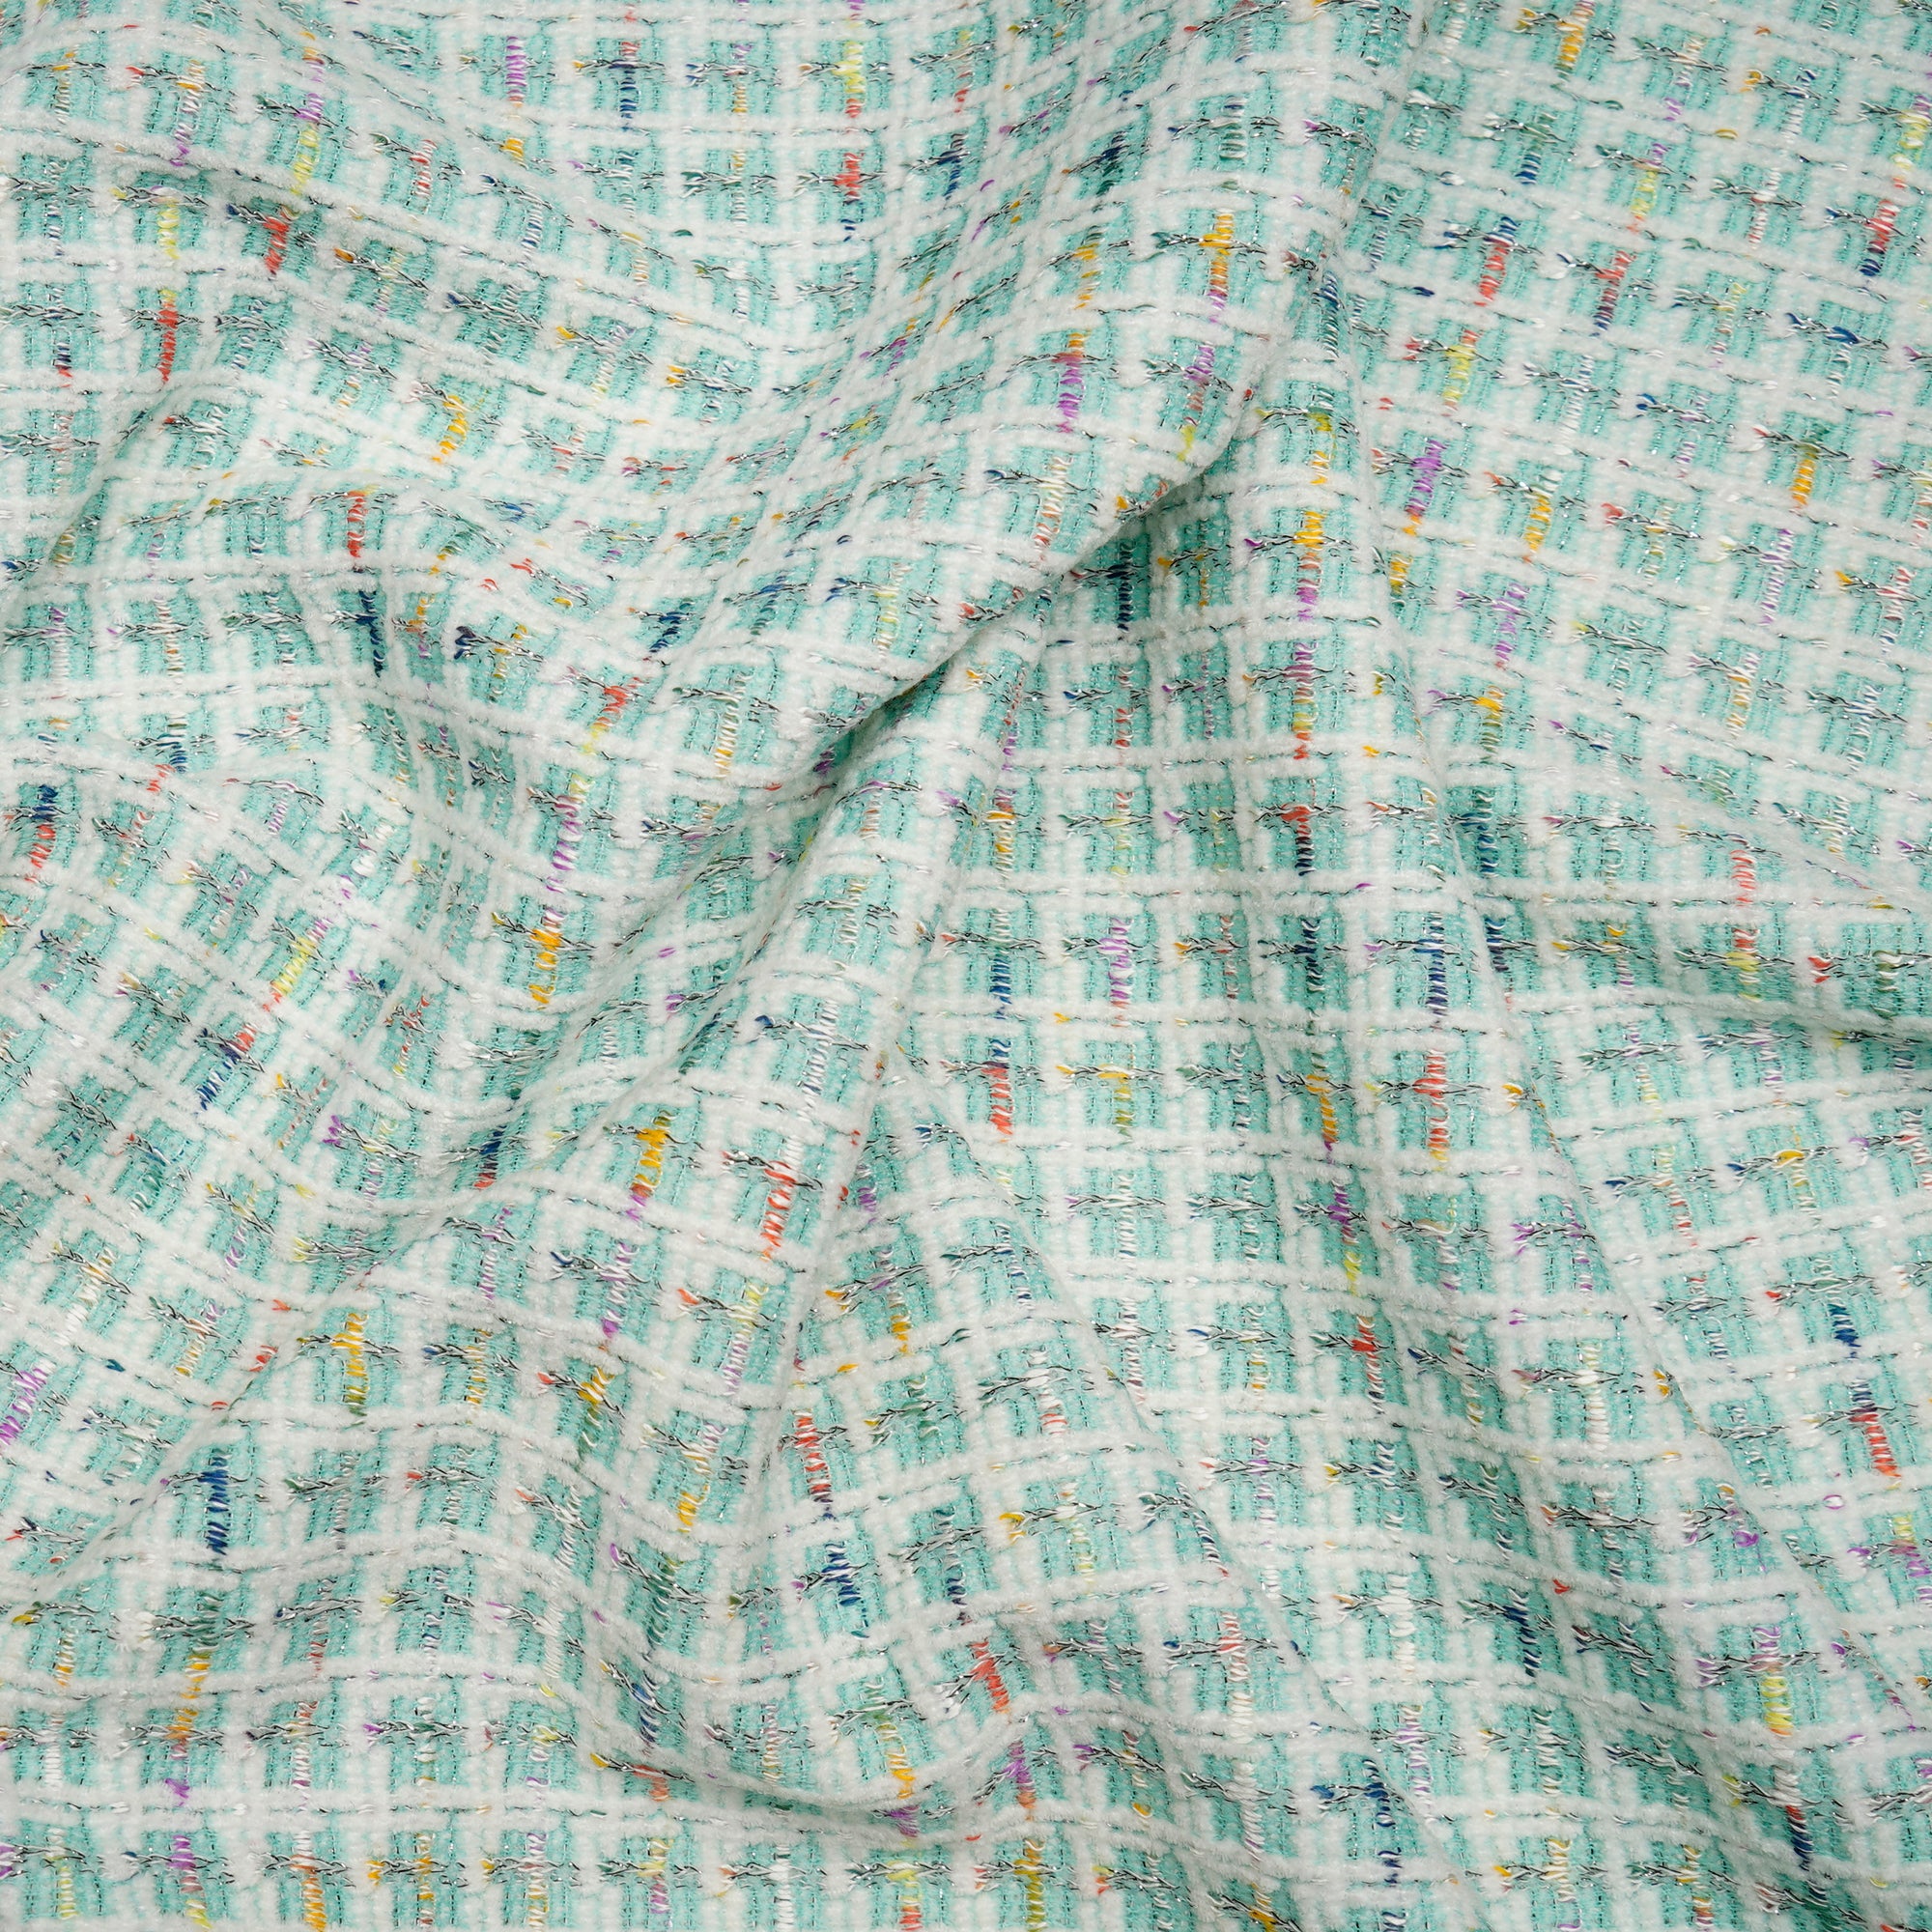 Green-White Premium Shimmer Imported Stretch Tweed Fabric (60" Width)